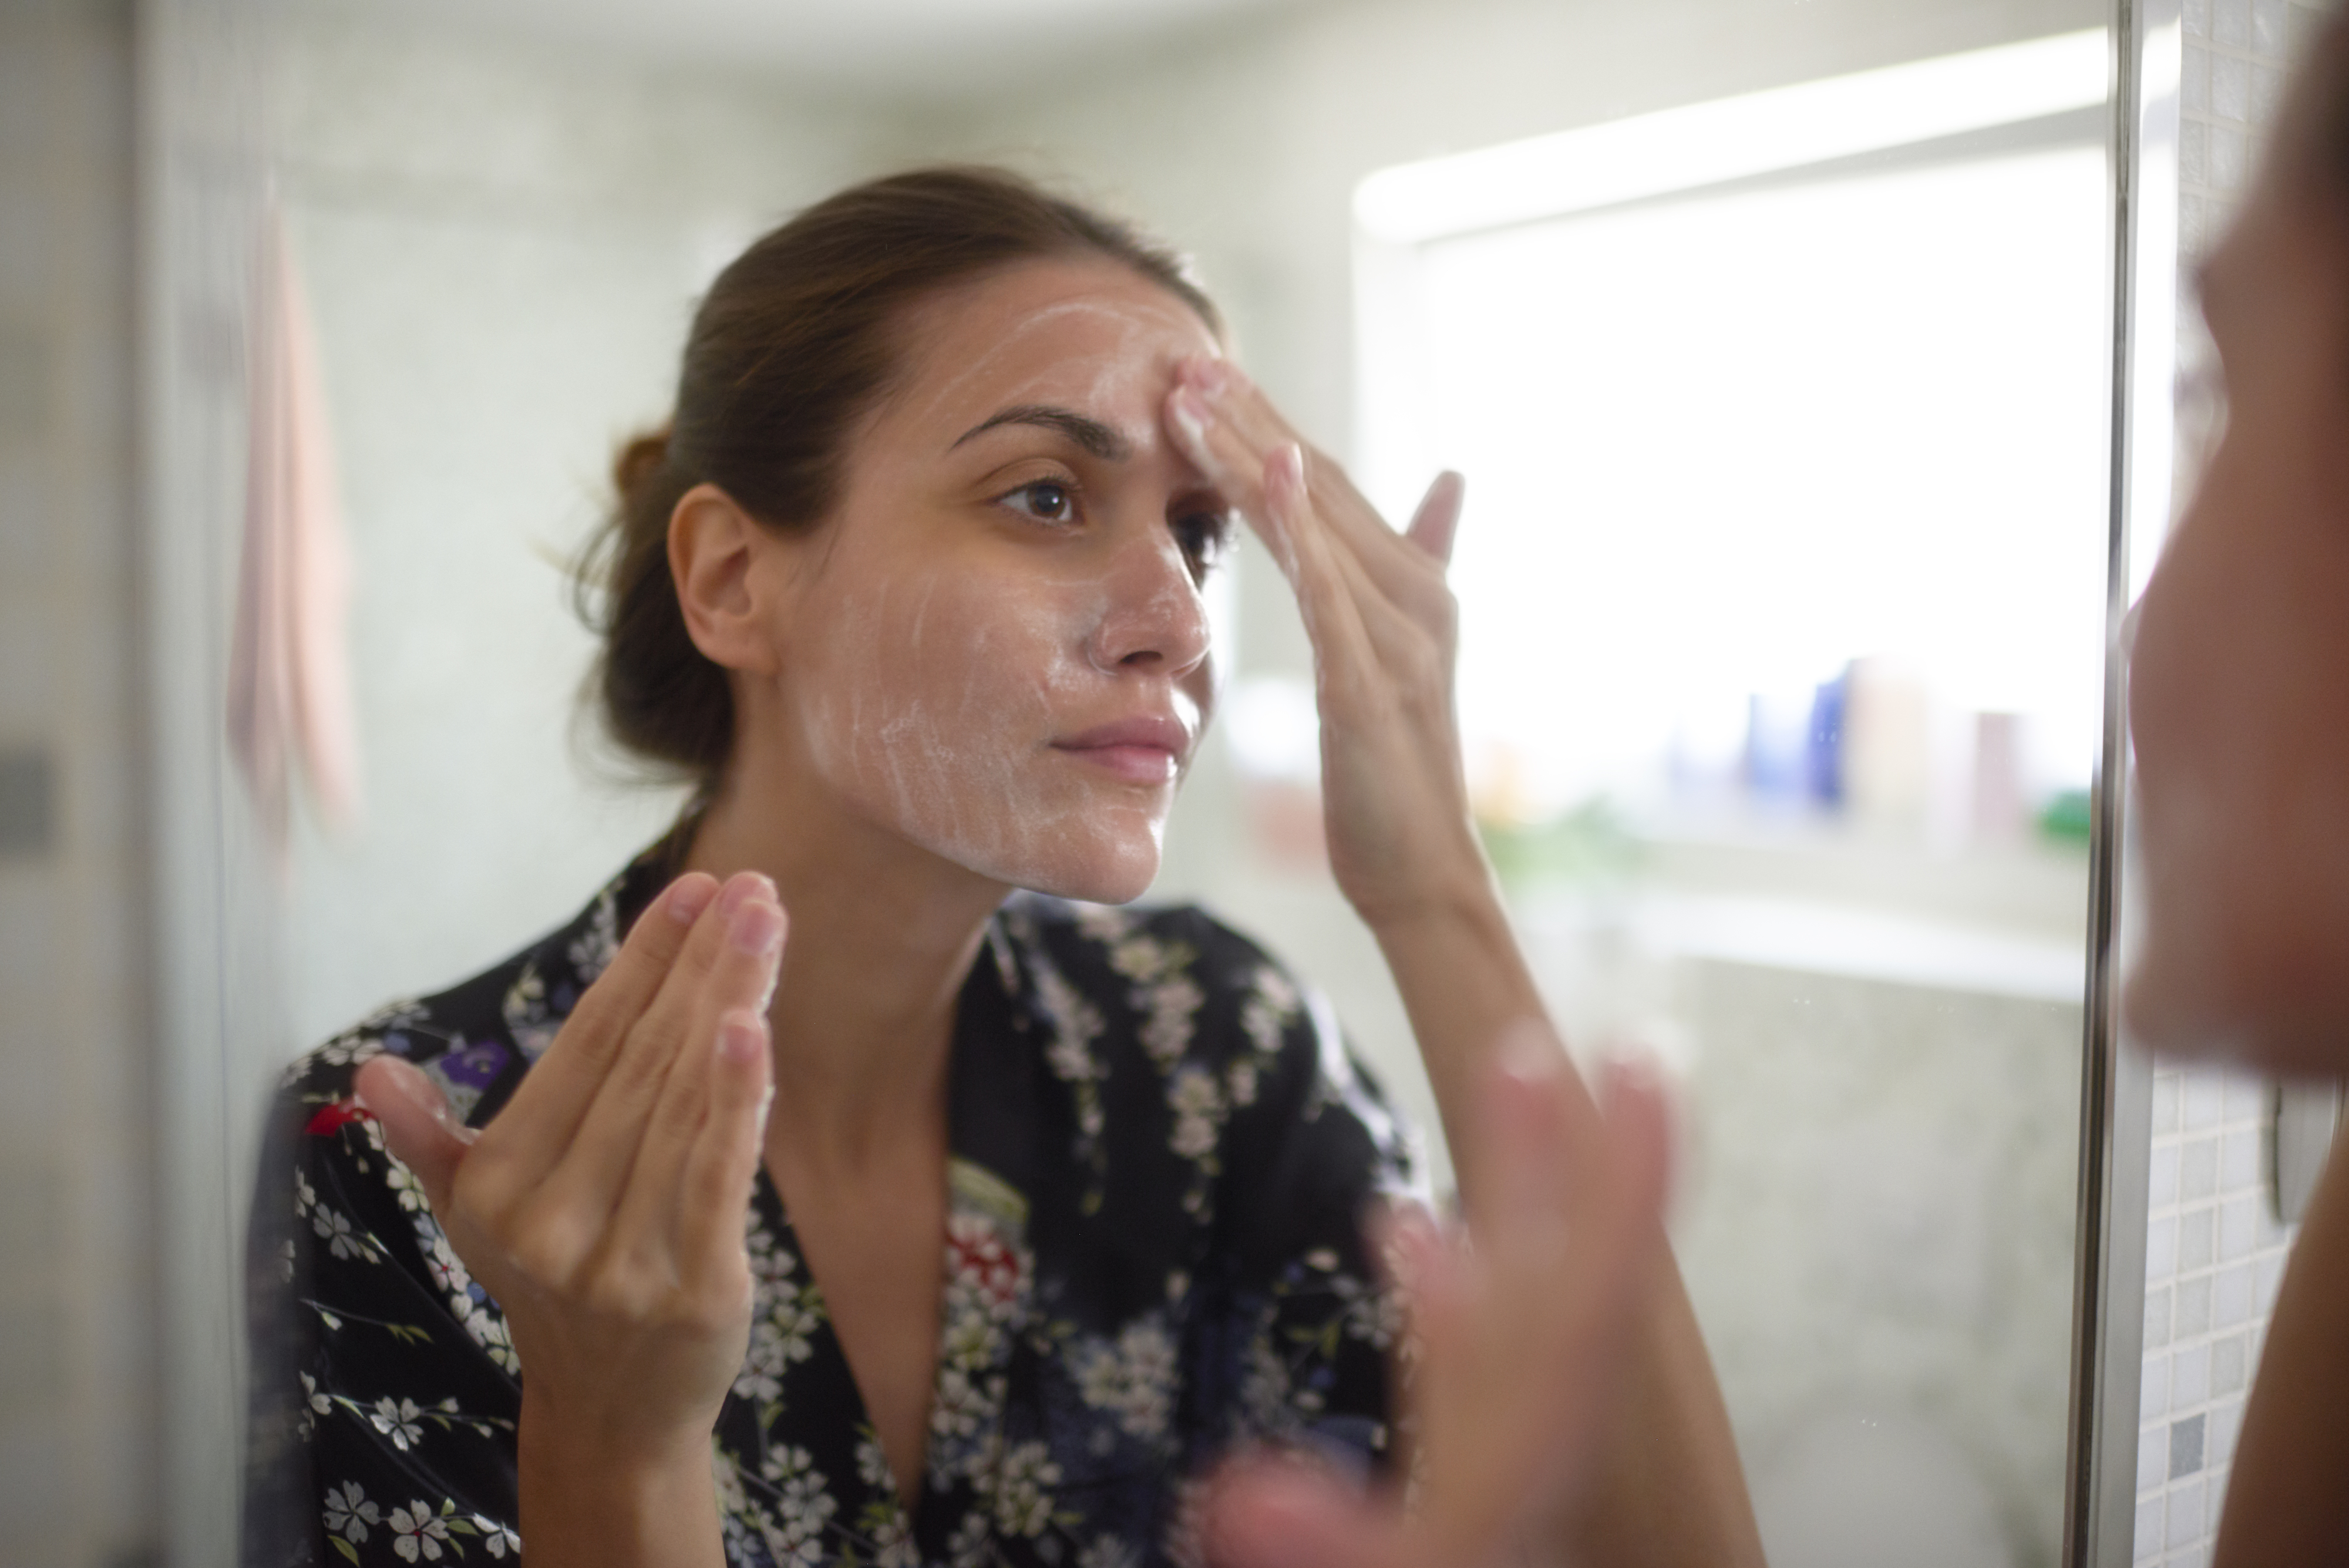 A Dermatologist Shared The Best Way To Wash Your Face